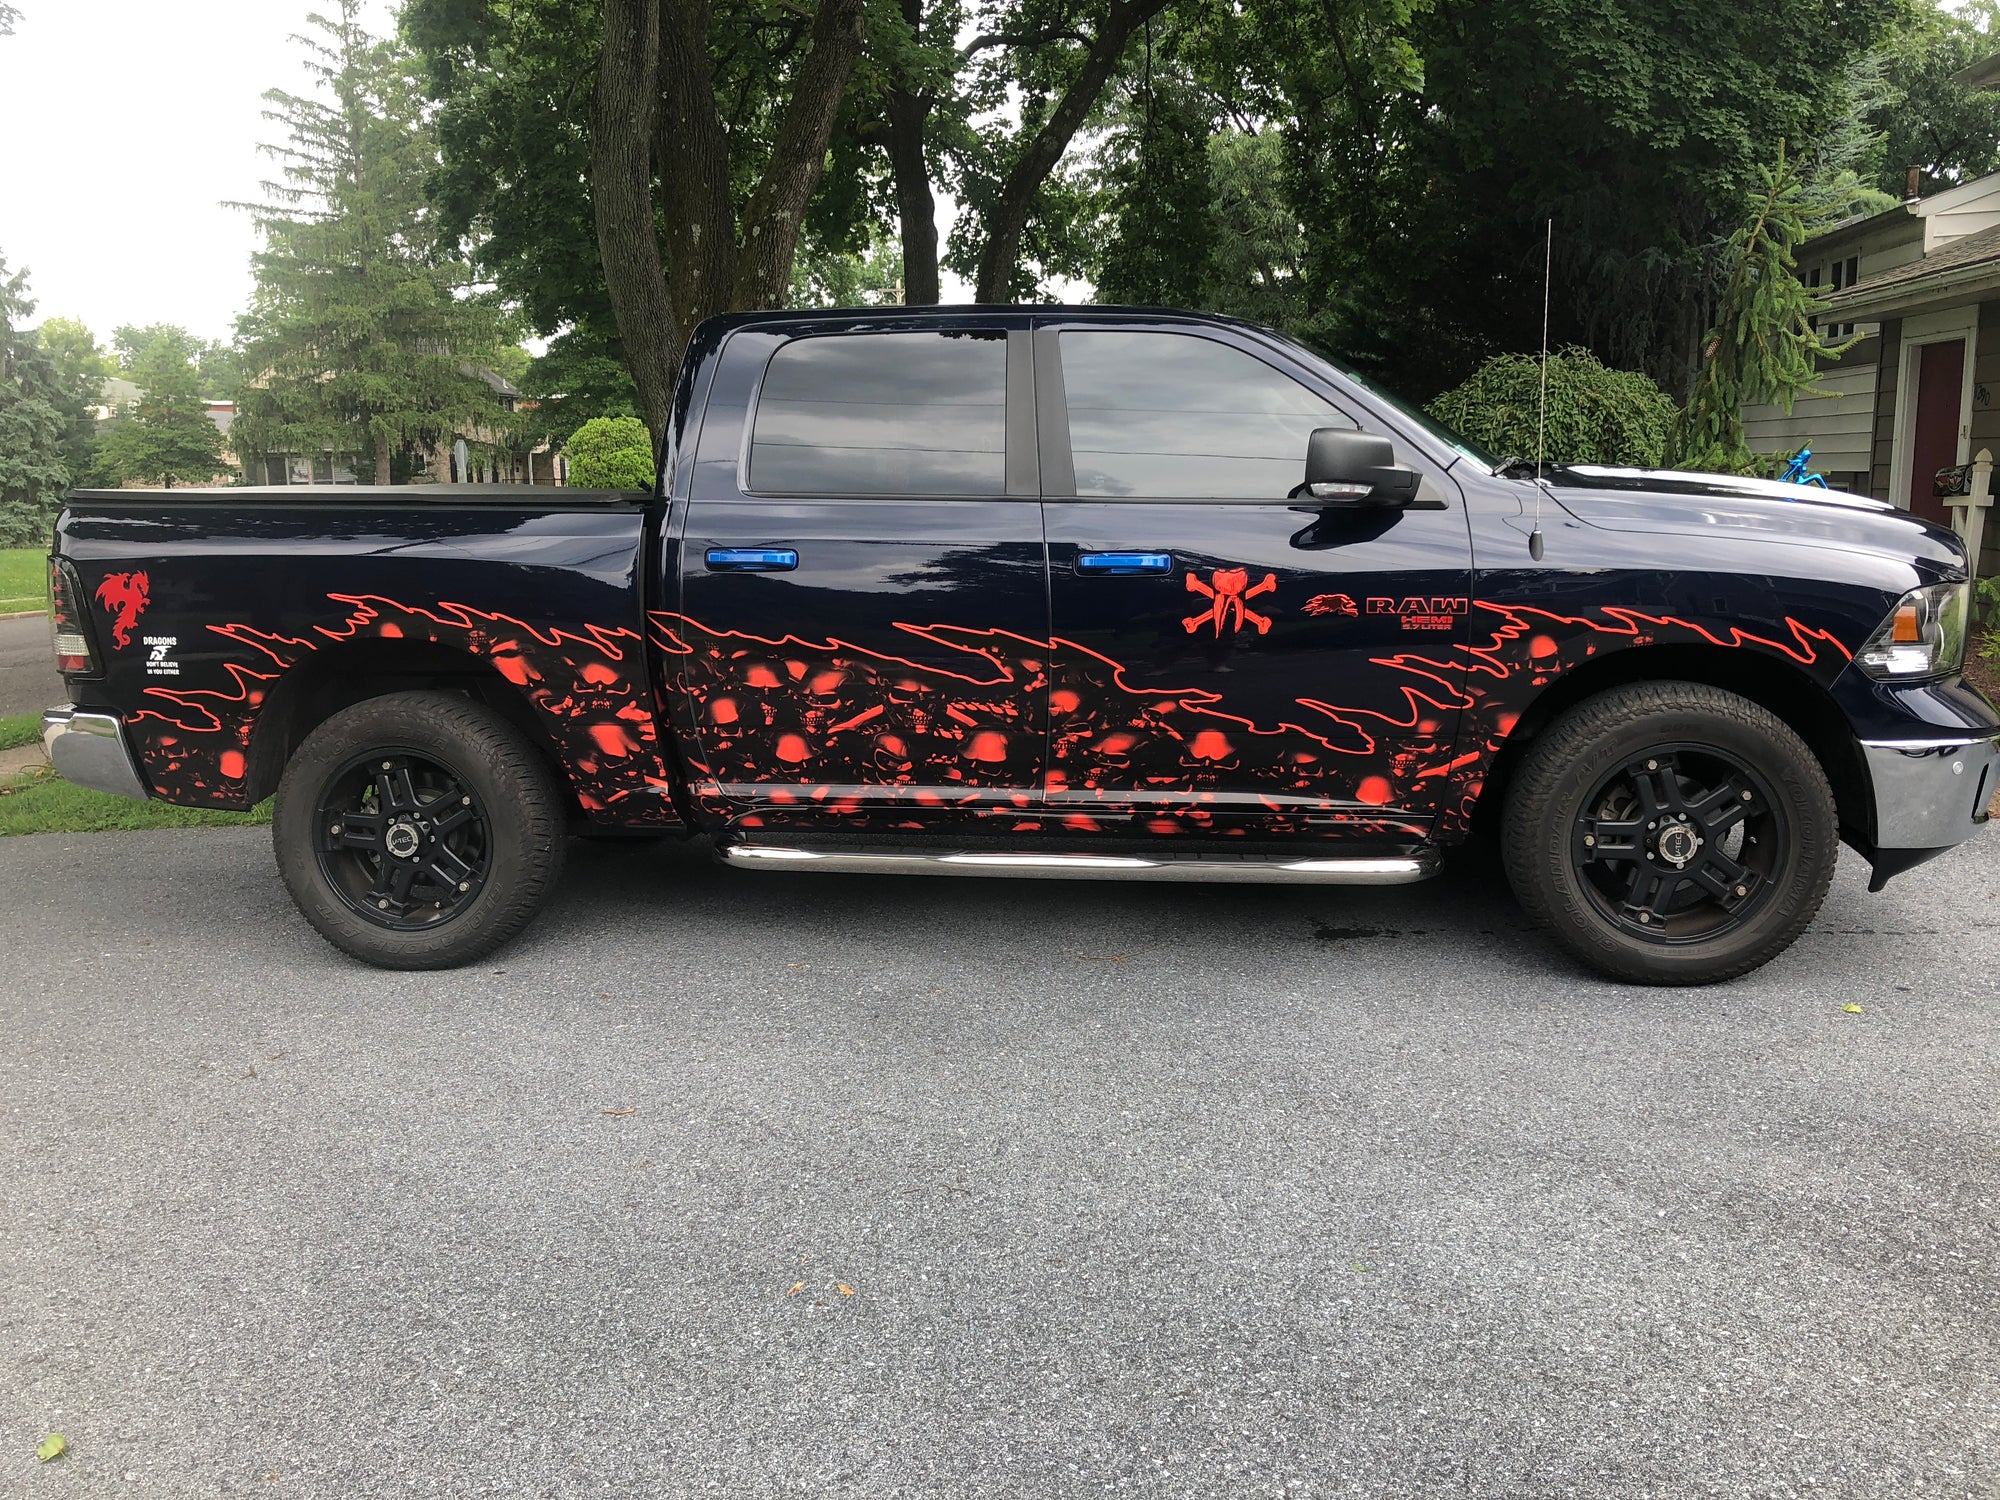 red skulls wave decal on the side of a black pick up truck